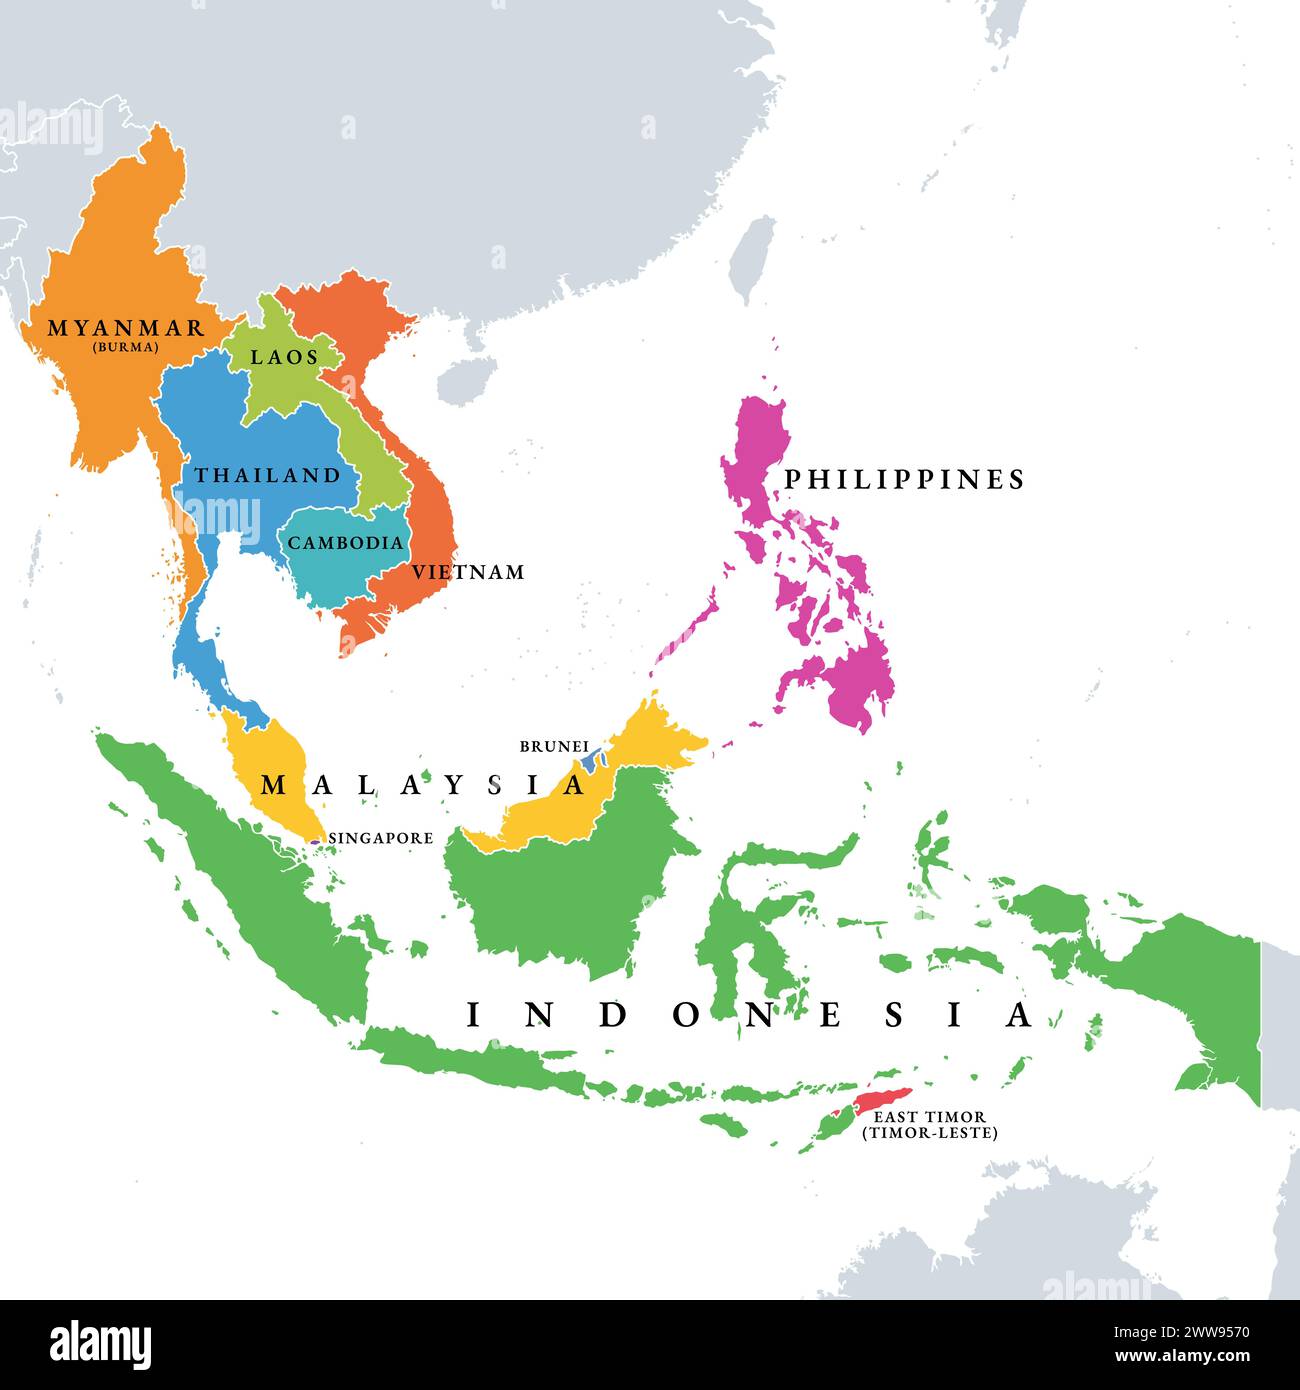 Southeast Asia countries, political map. Geographical region of Asia, bordered by East and South Asia, Oceania, Pacific Ocean and Australia. Stock Photo